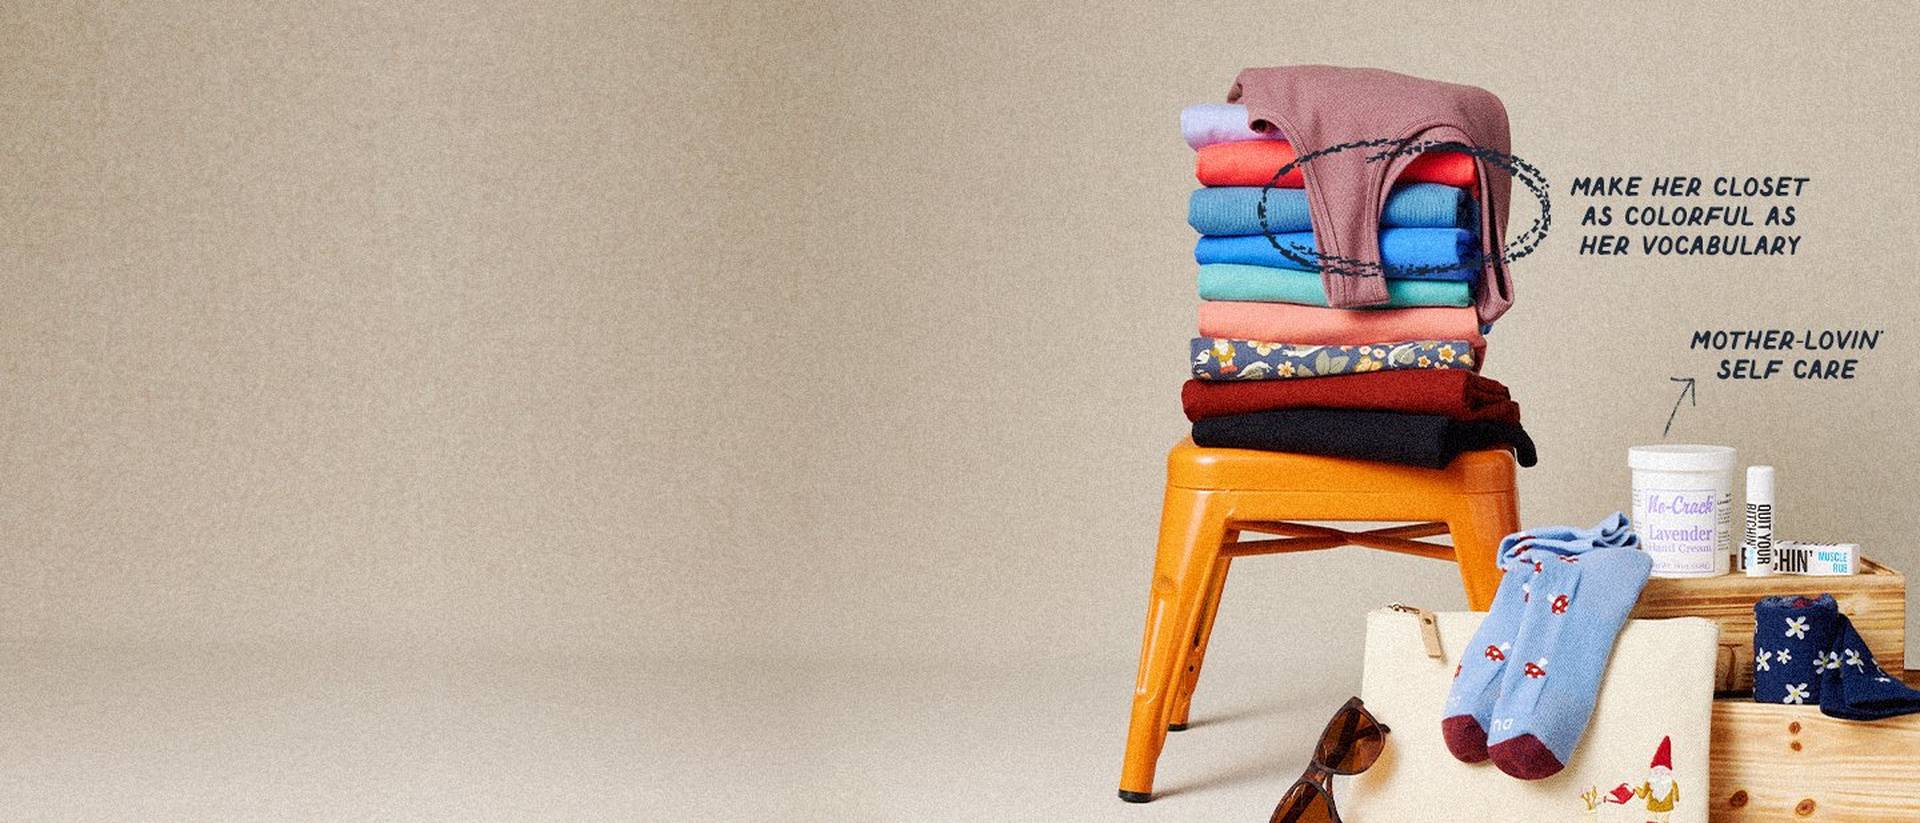 Stack of No-Yank tanks on a mini orange stool; To the left are self-care gifts, socks and sunglasses